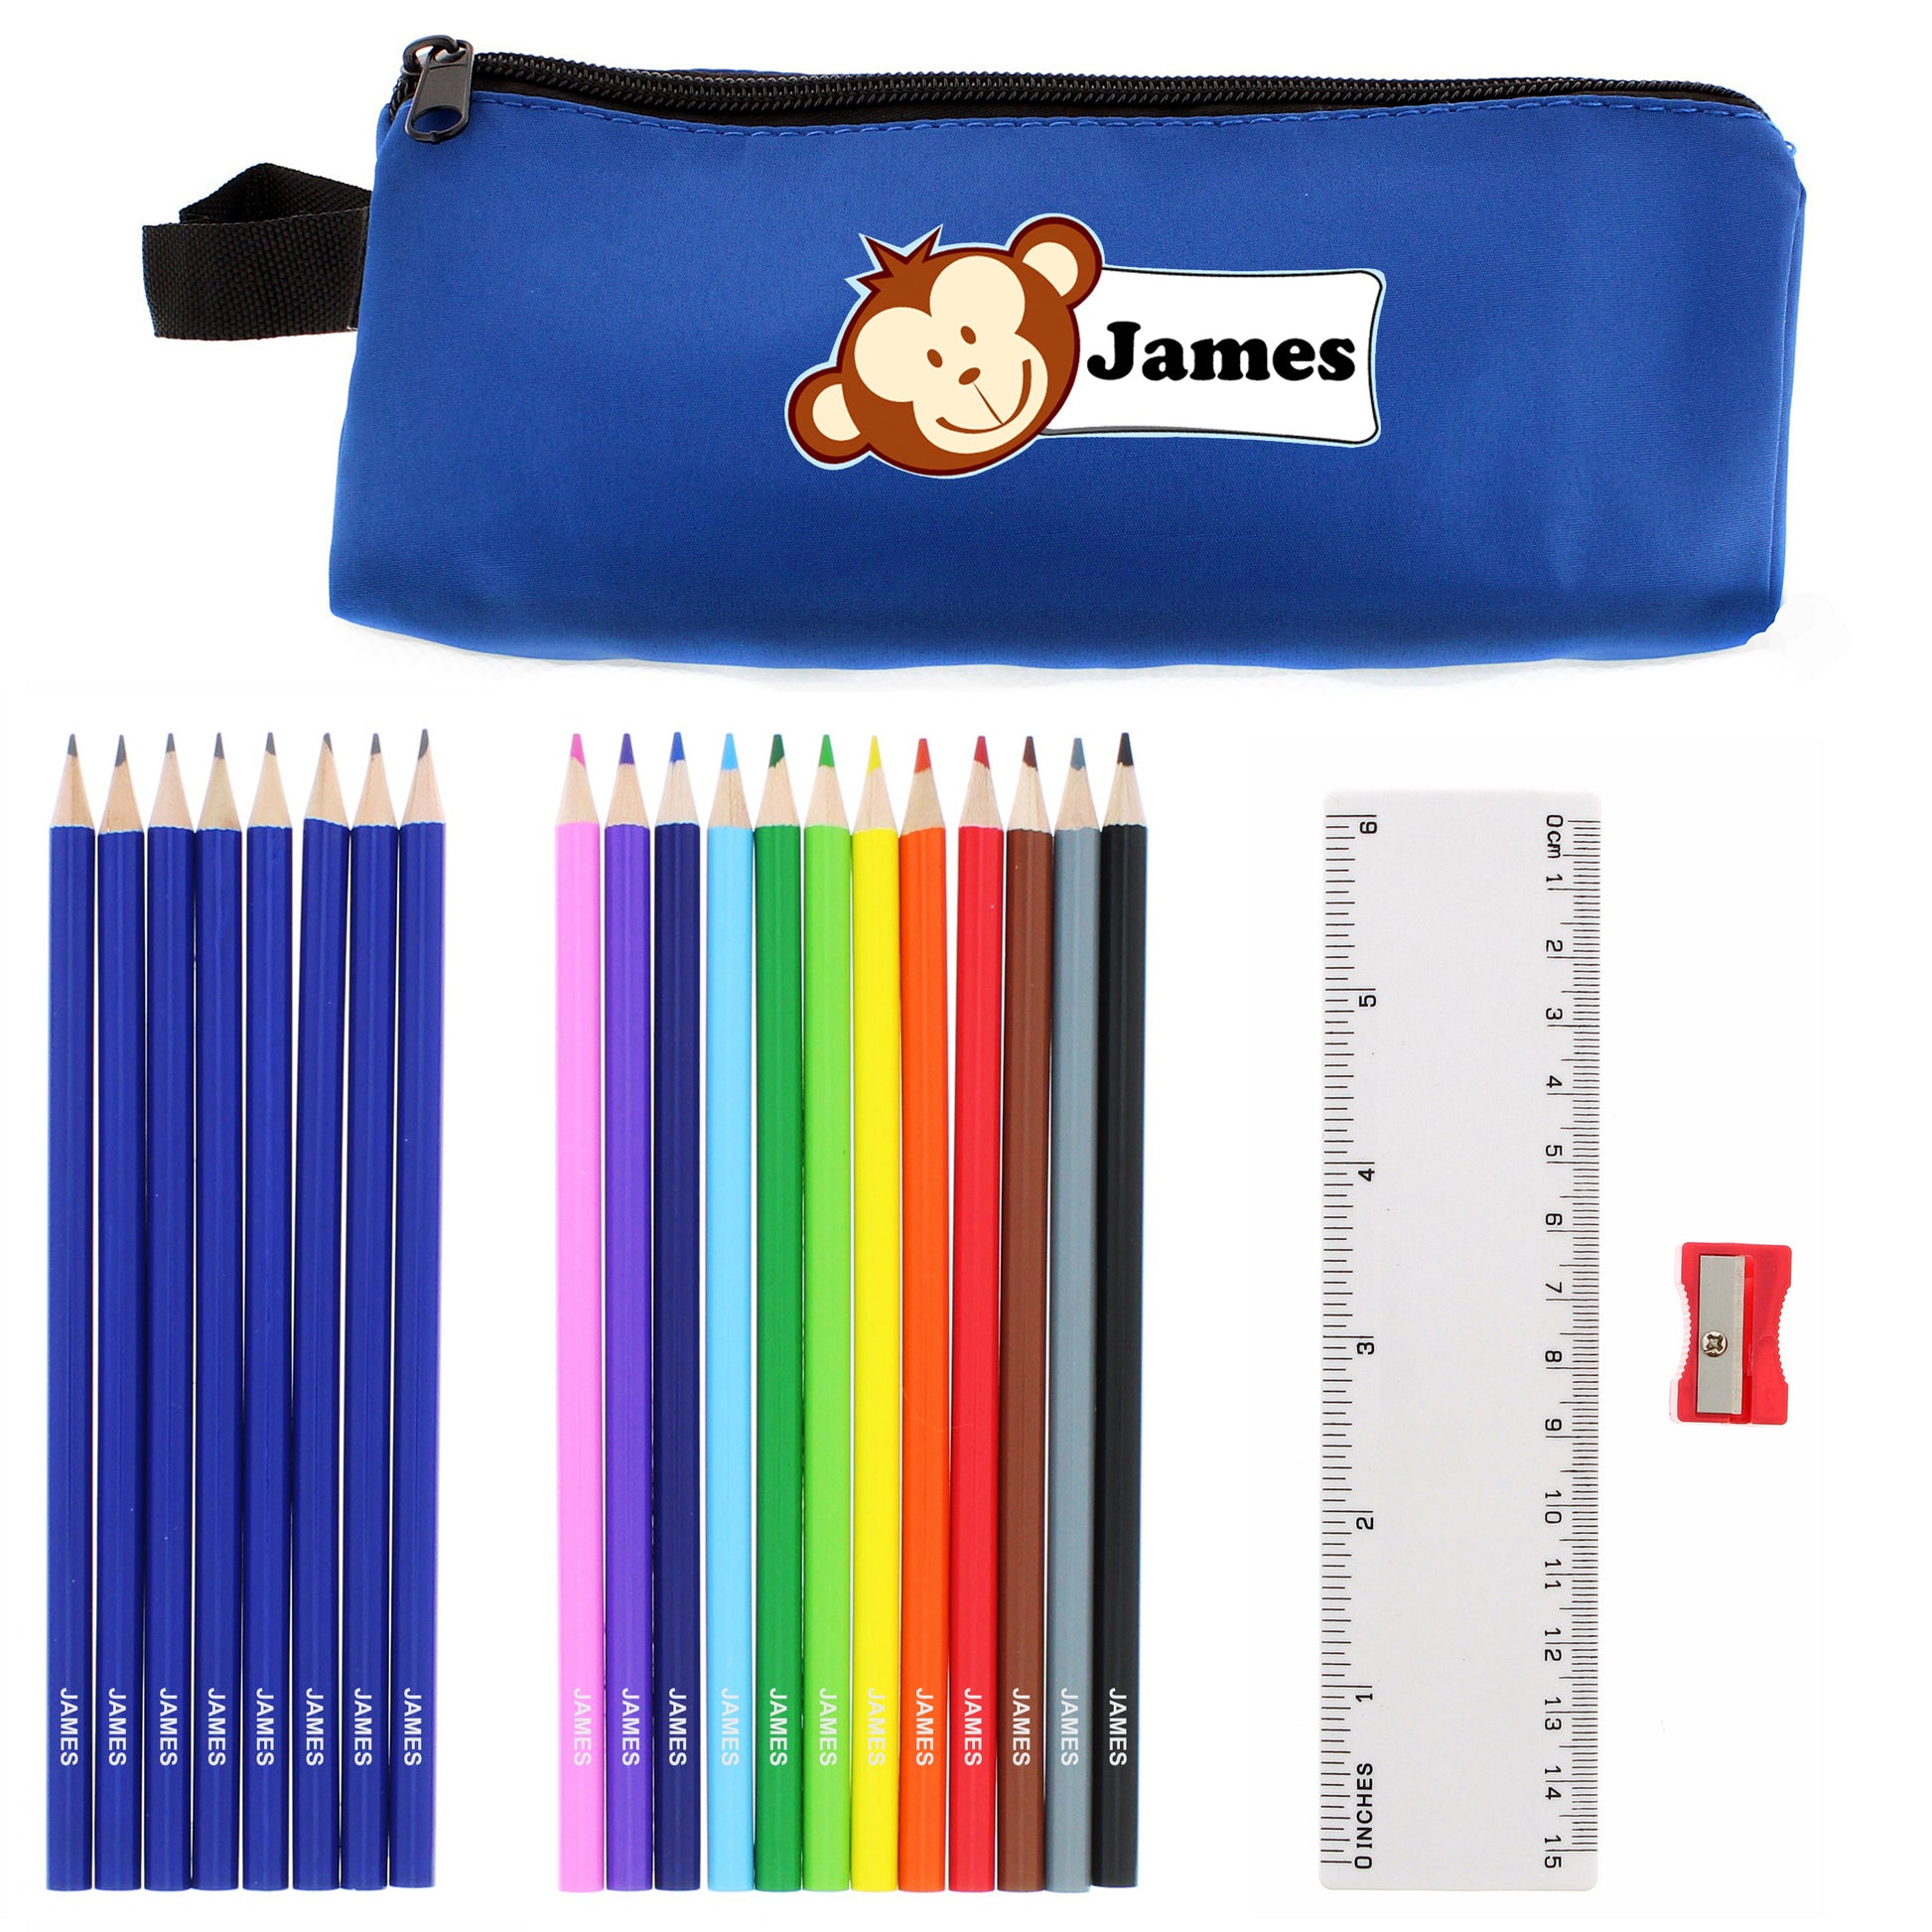 Personalised Blue Monkey Pencil Case with Pencils & Crayons